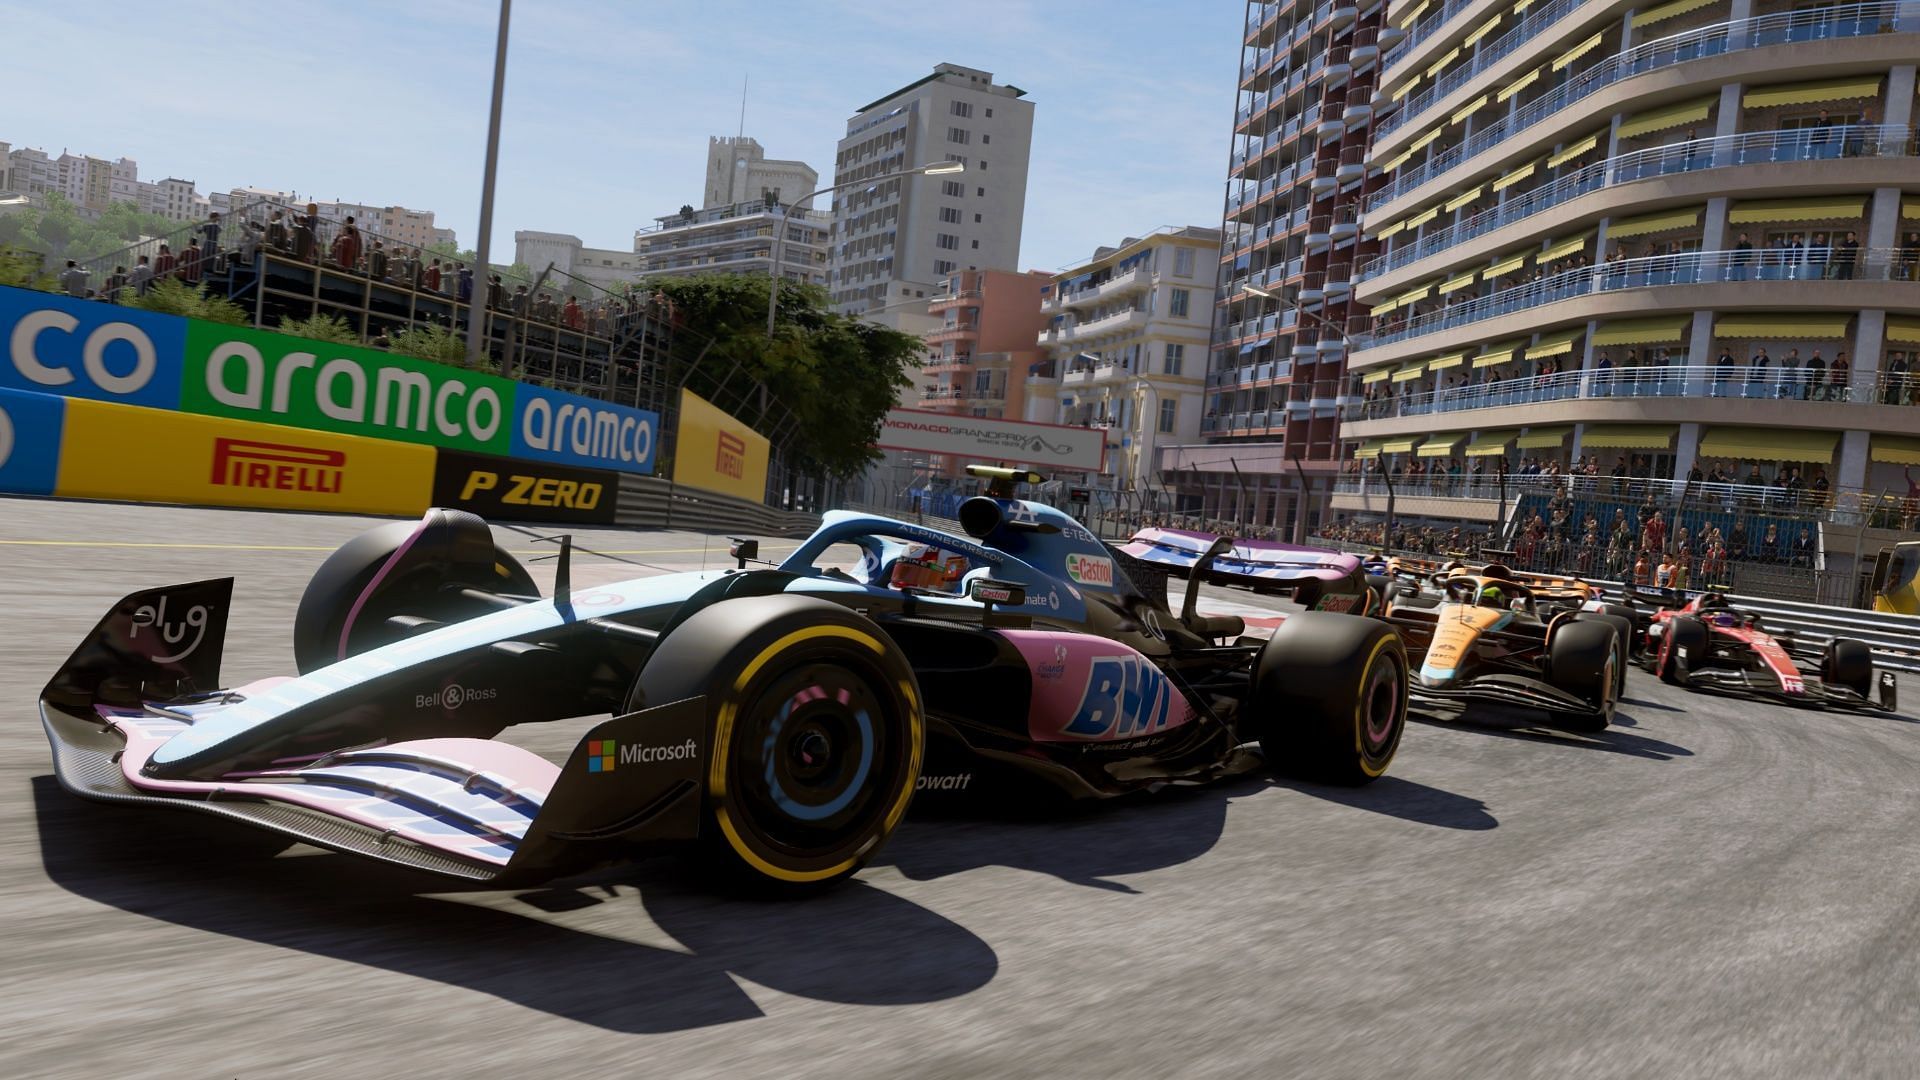 F1 23 features some really breathtaking visuals (Image via Electronic Arts)